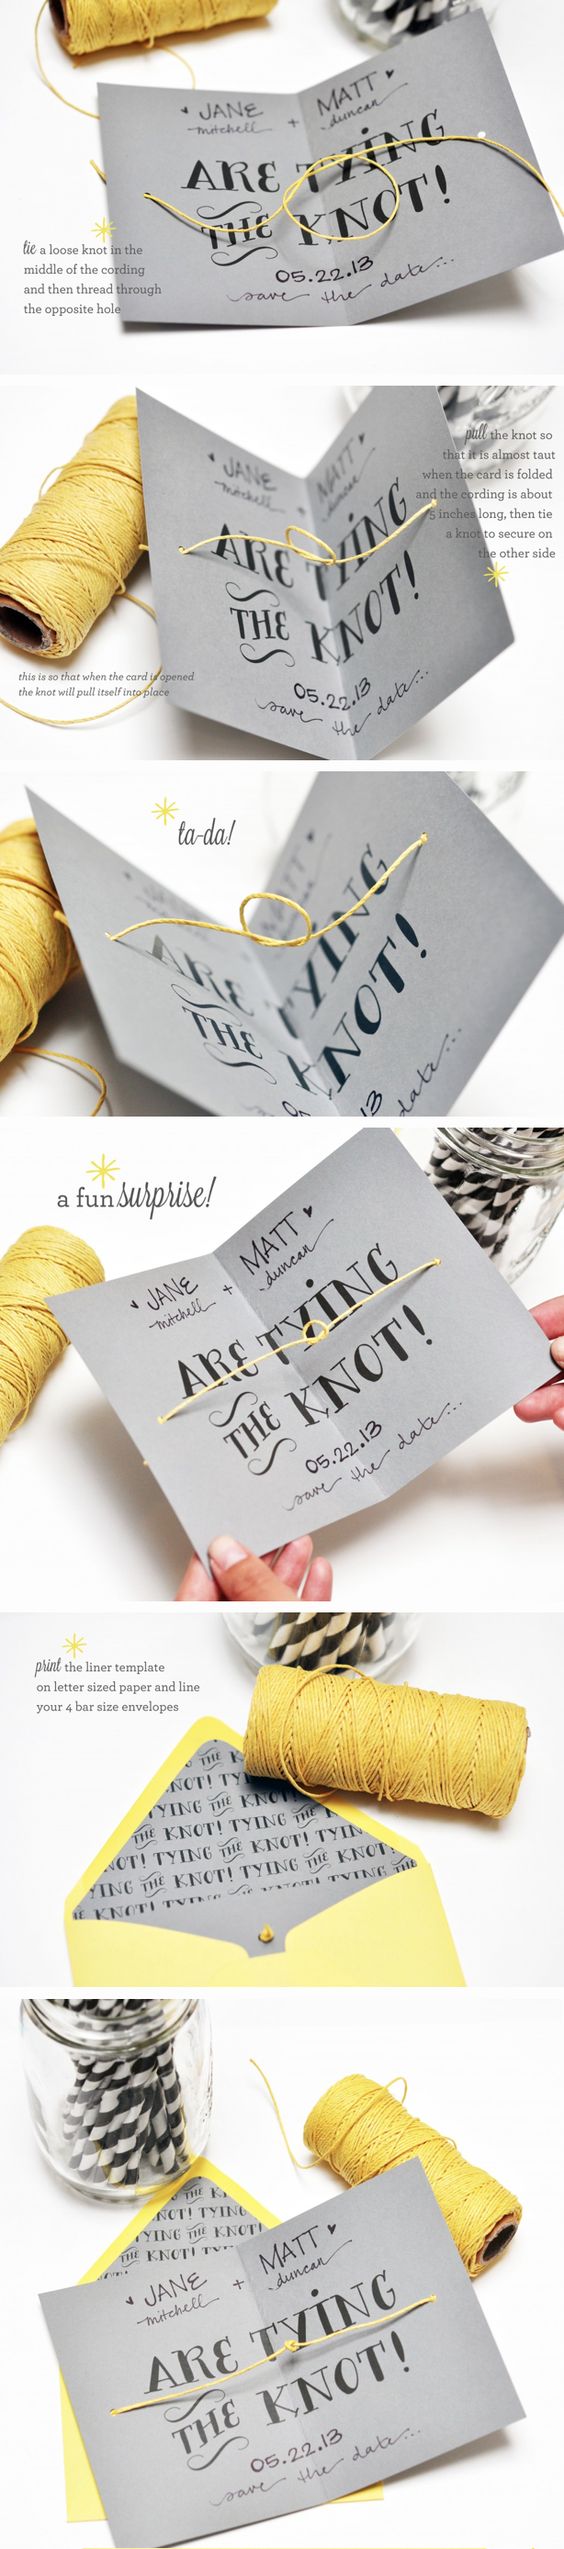 DIY-tying-the-knot-cards-from-Smitten-on-Paper.jpg